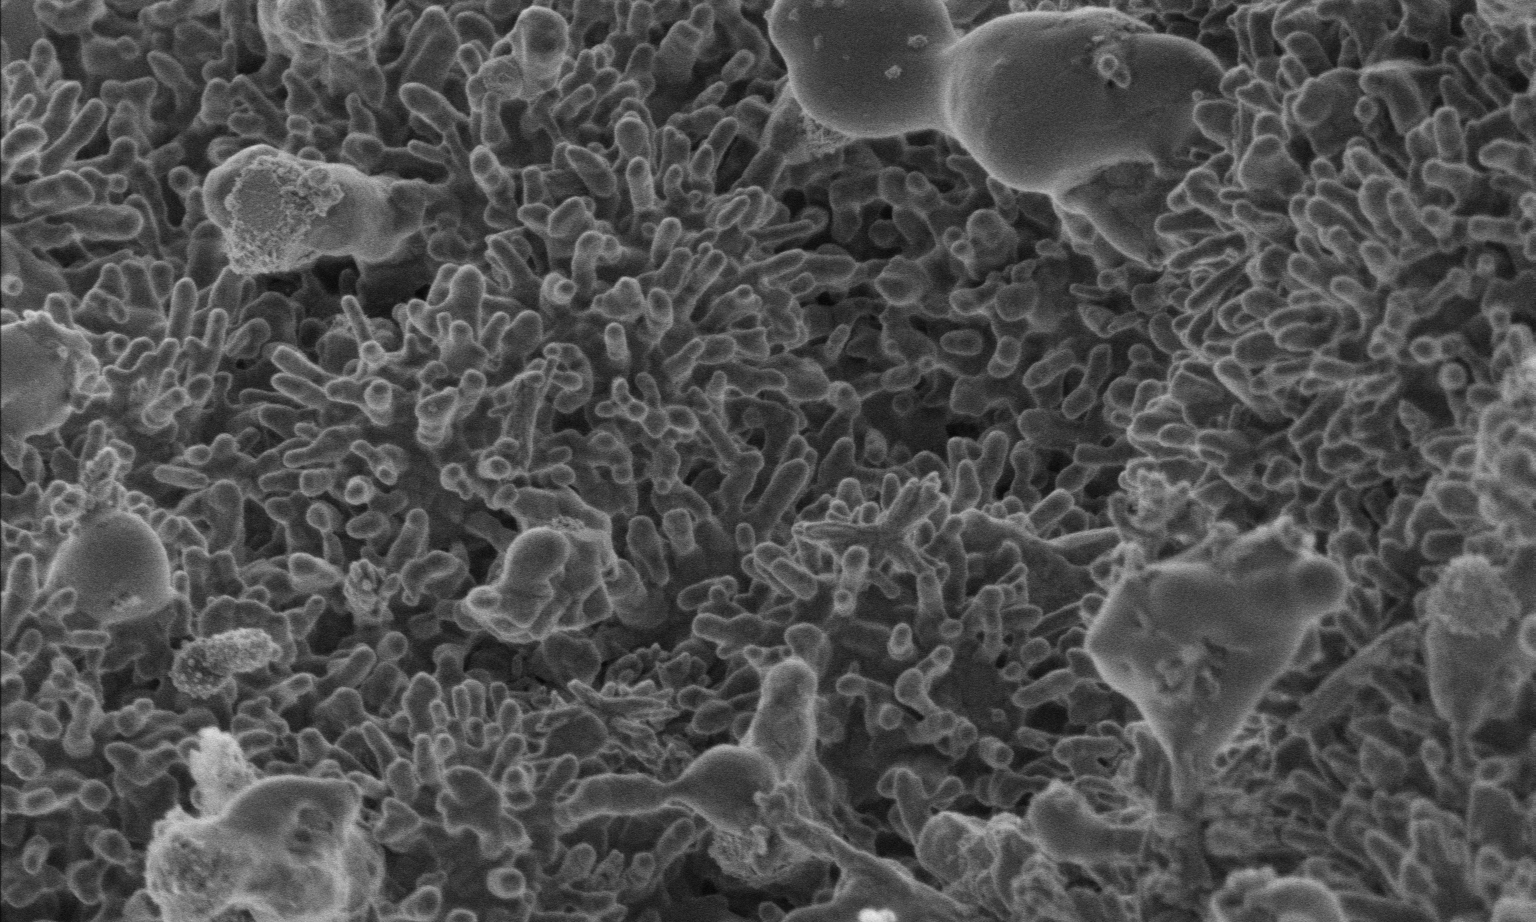 Magnified image of advanced carbon nanomaterials